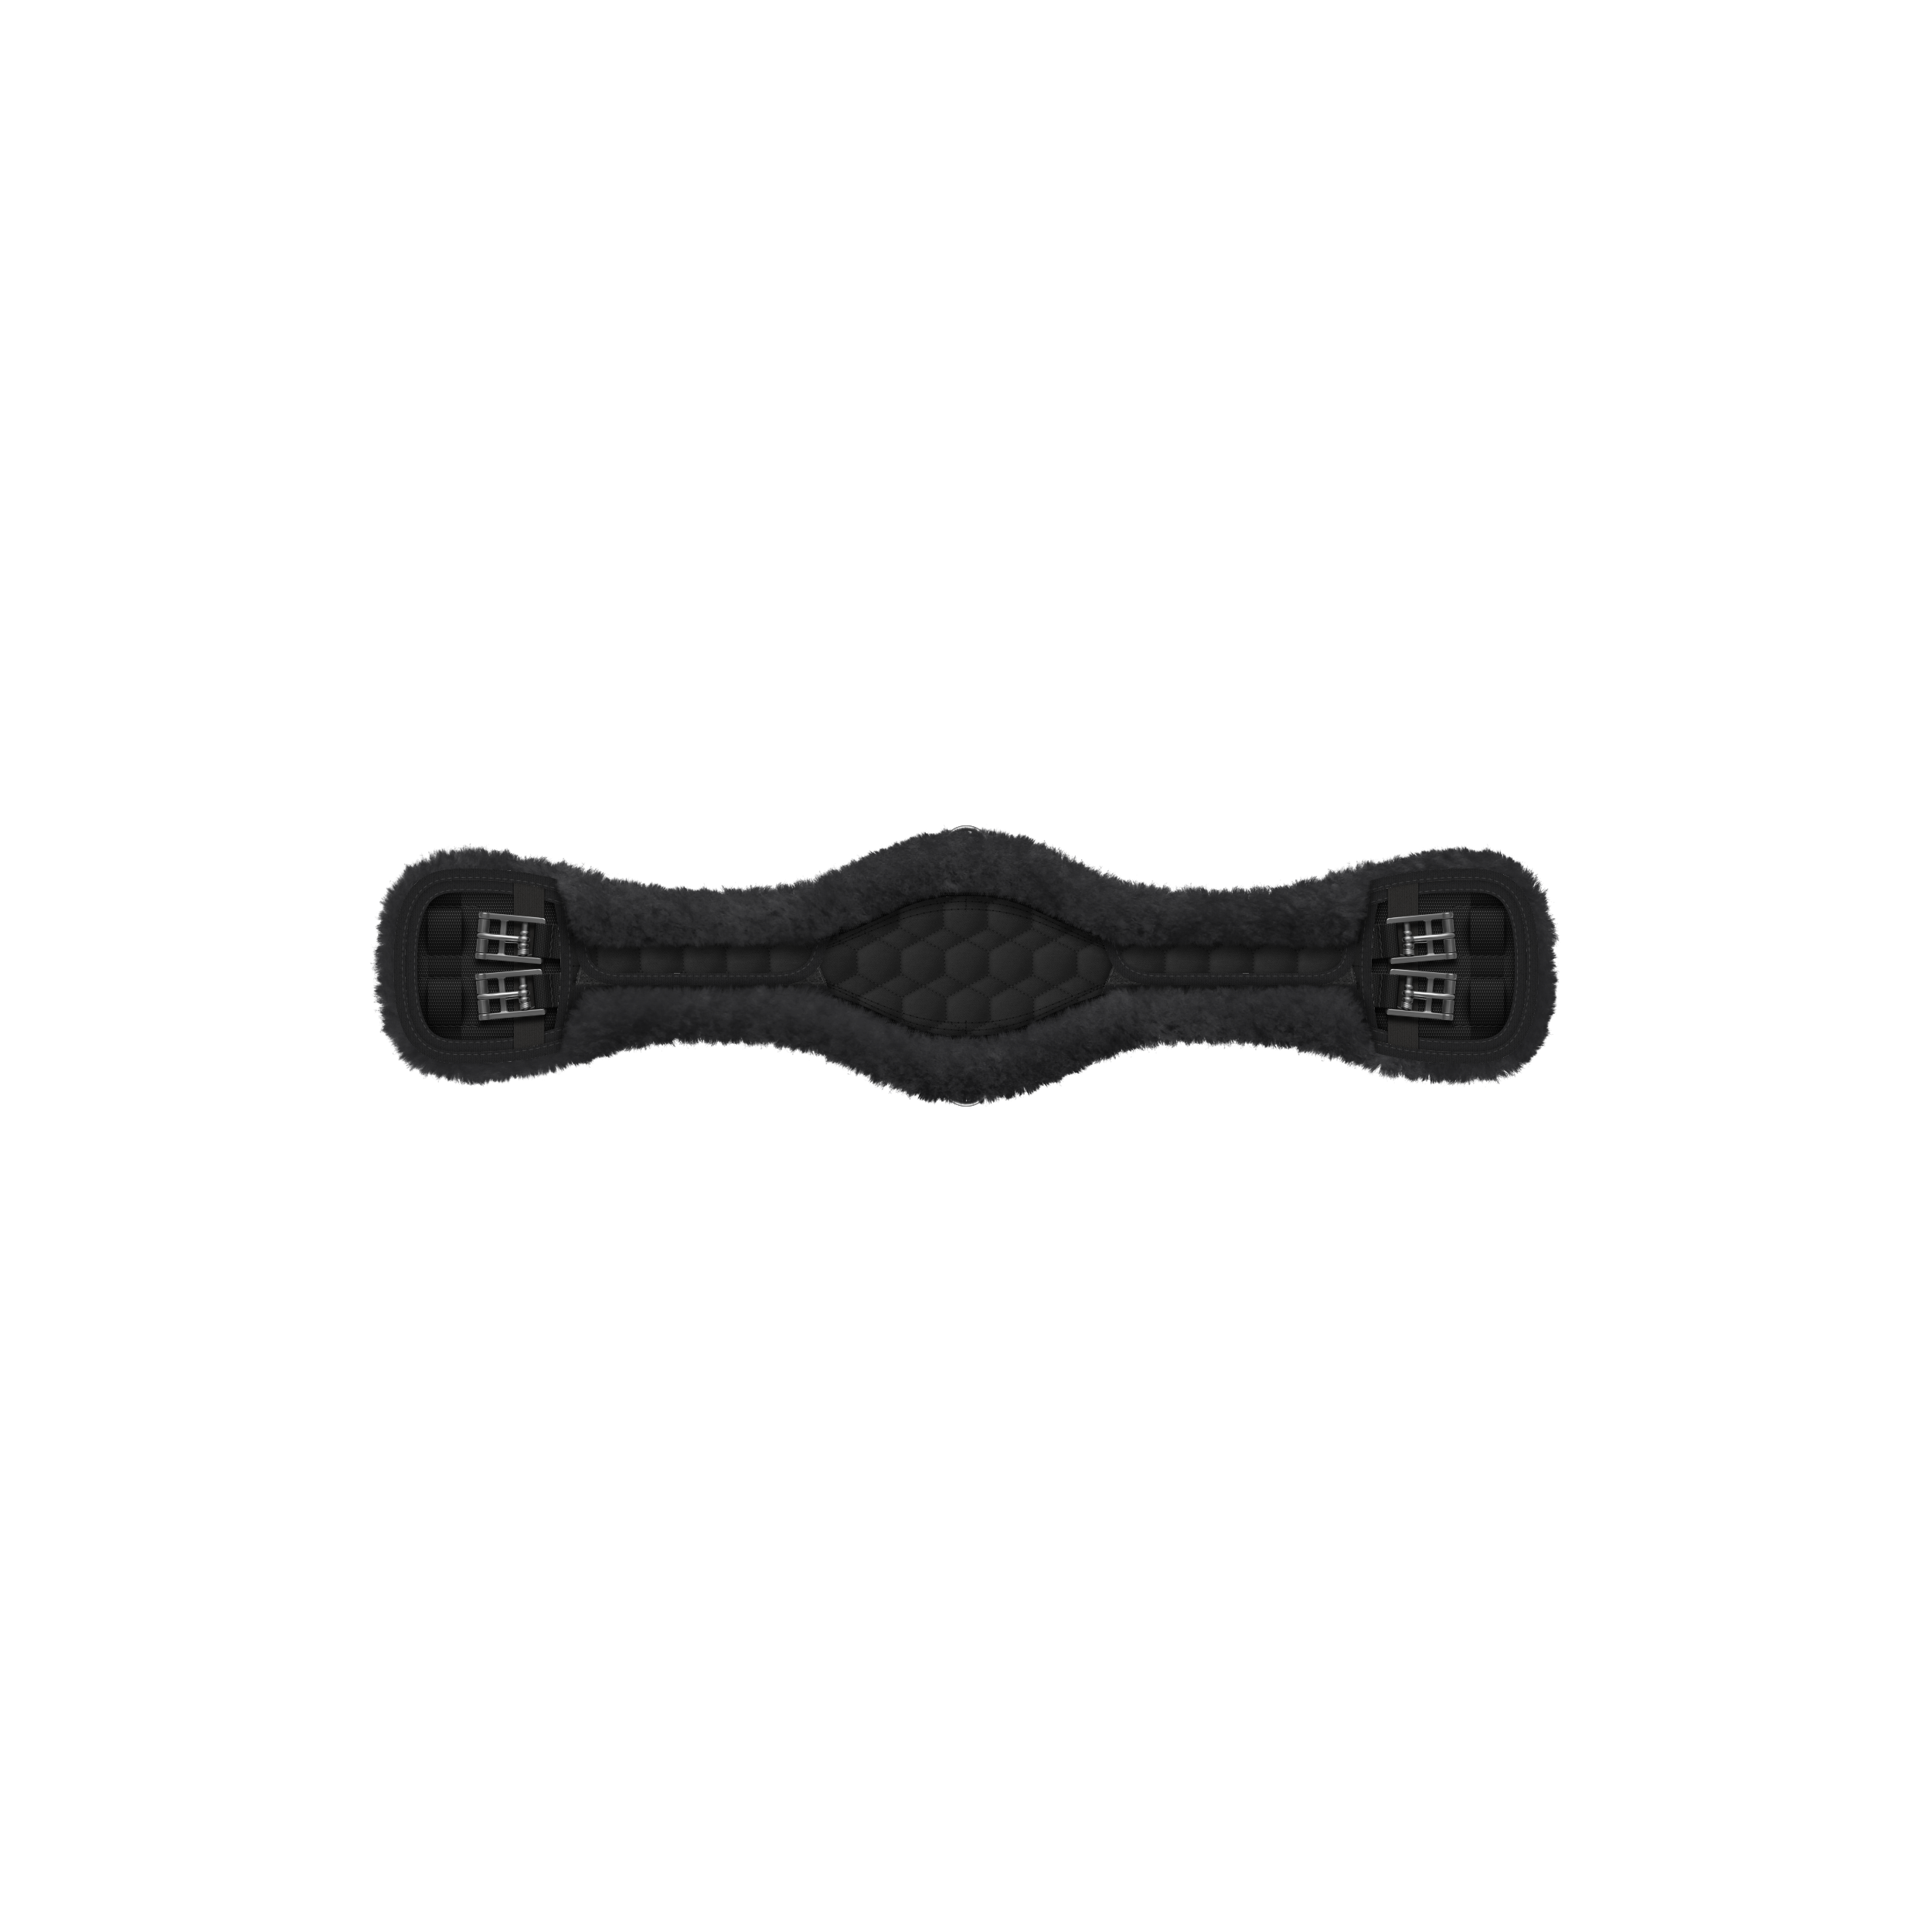 Mattes Short Girth - Anatomic with detachable cover